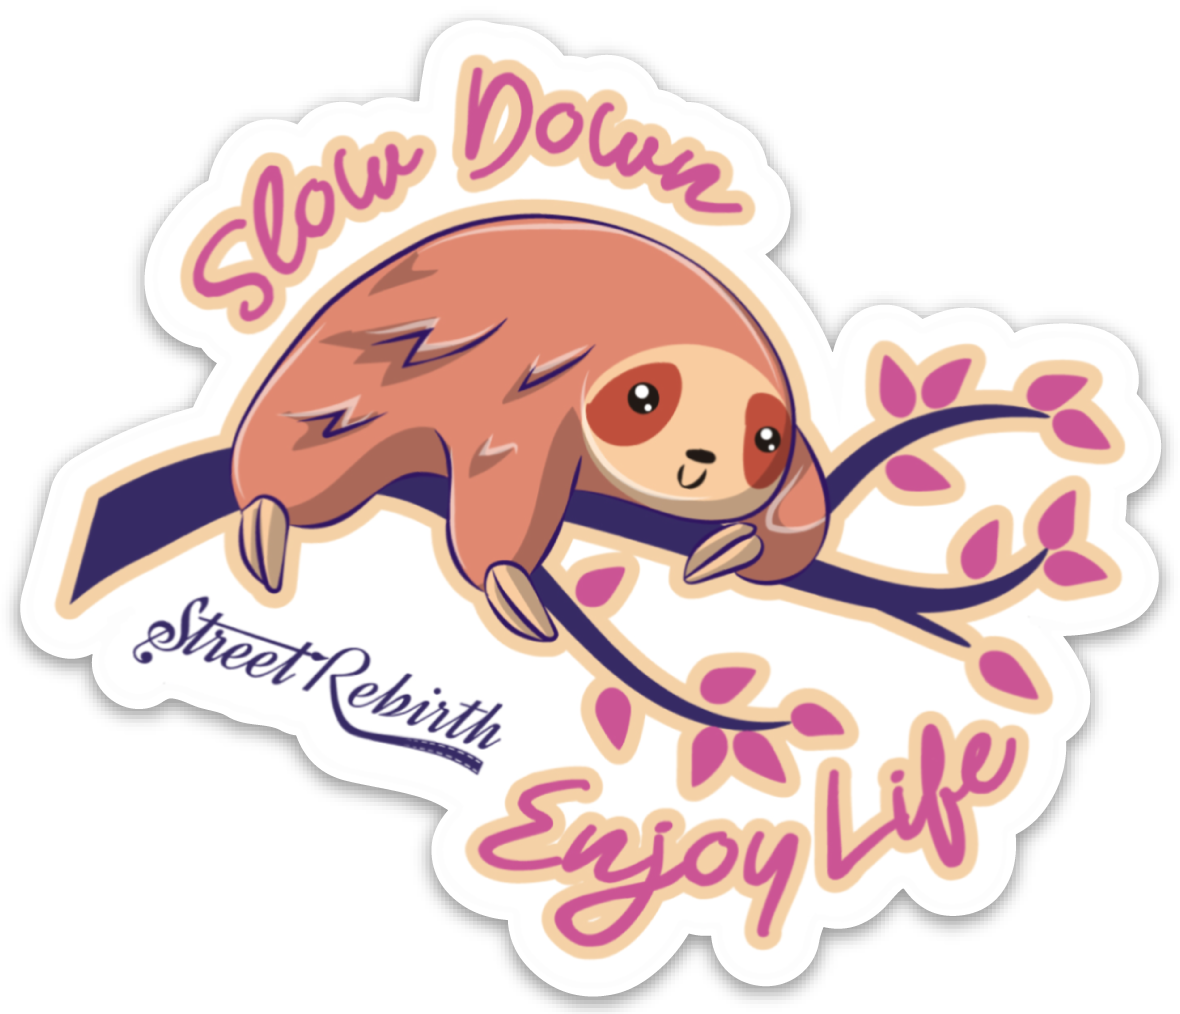 Slow Down PUN STICKER – ONE 4 INCH WATER PROOF VINYL STICKER – FOR HYDRO FLASK, SKATEBOARD, LAPTOP, PLANNER, CAR, COLLECTING, GIFTING